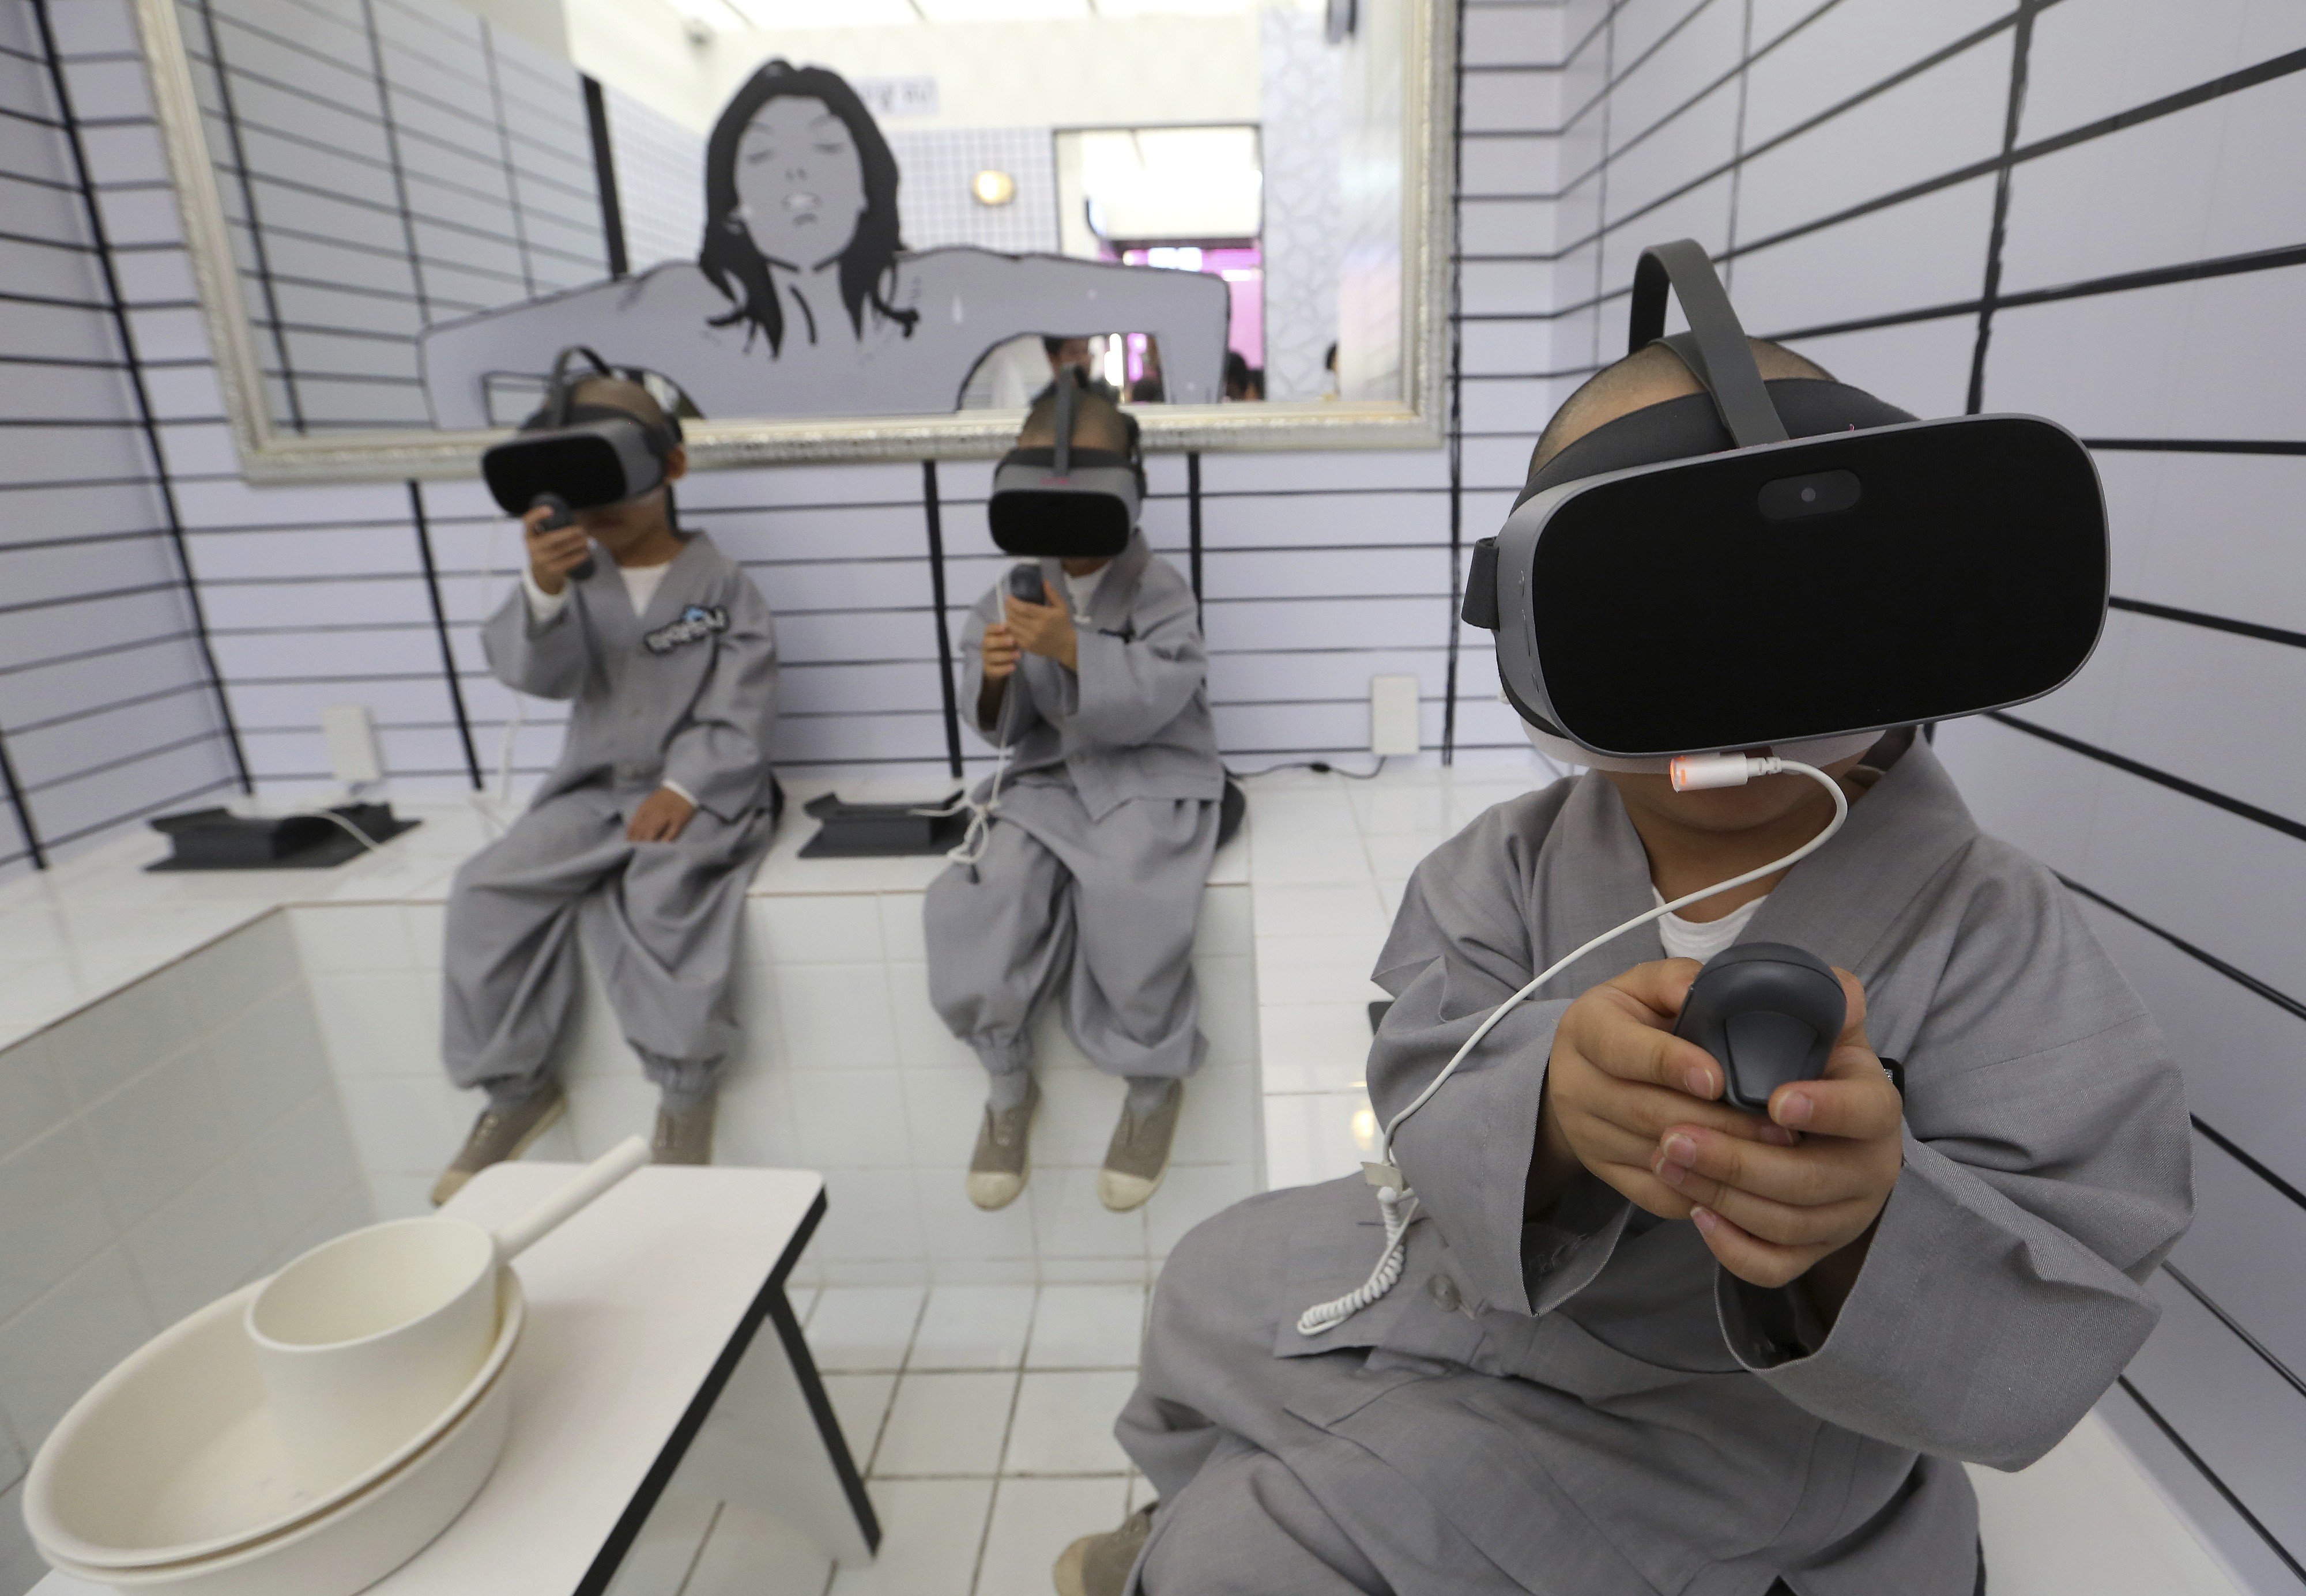 Boys wear virtual reality devices to experience 5G services at a LG Uplus 5G experience centre in Seoul. South Korea launched the world’s first commercial 5G network in April. Photo: AP